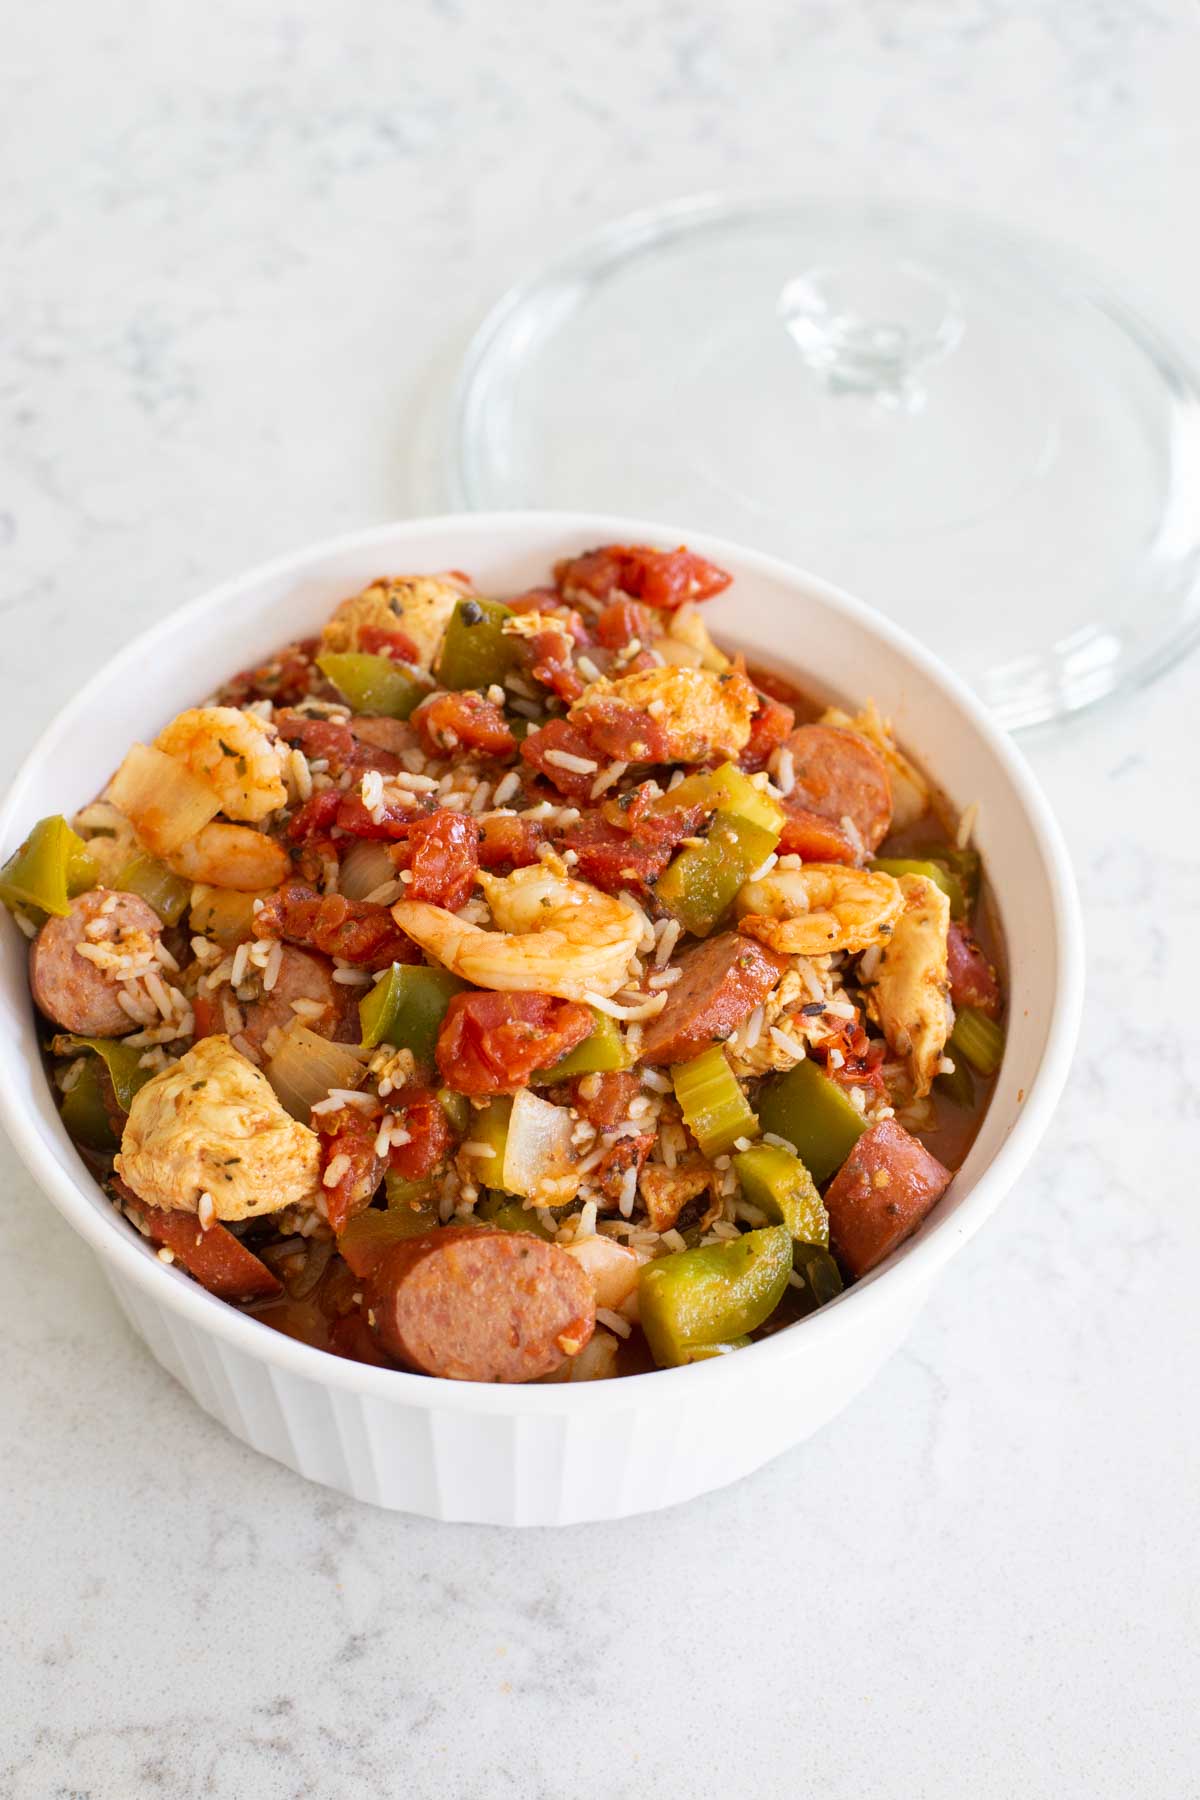 A glass casserole dish is filled with finished jambalaya for later or to bring to a friend.